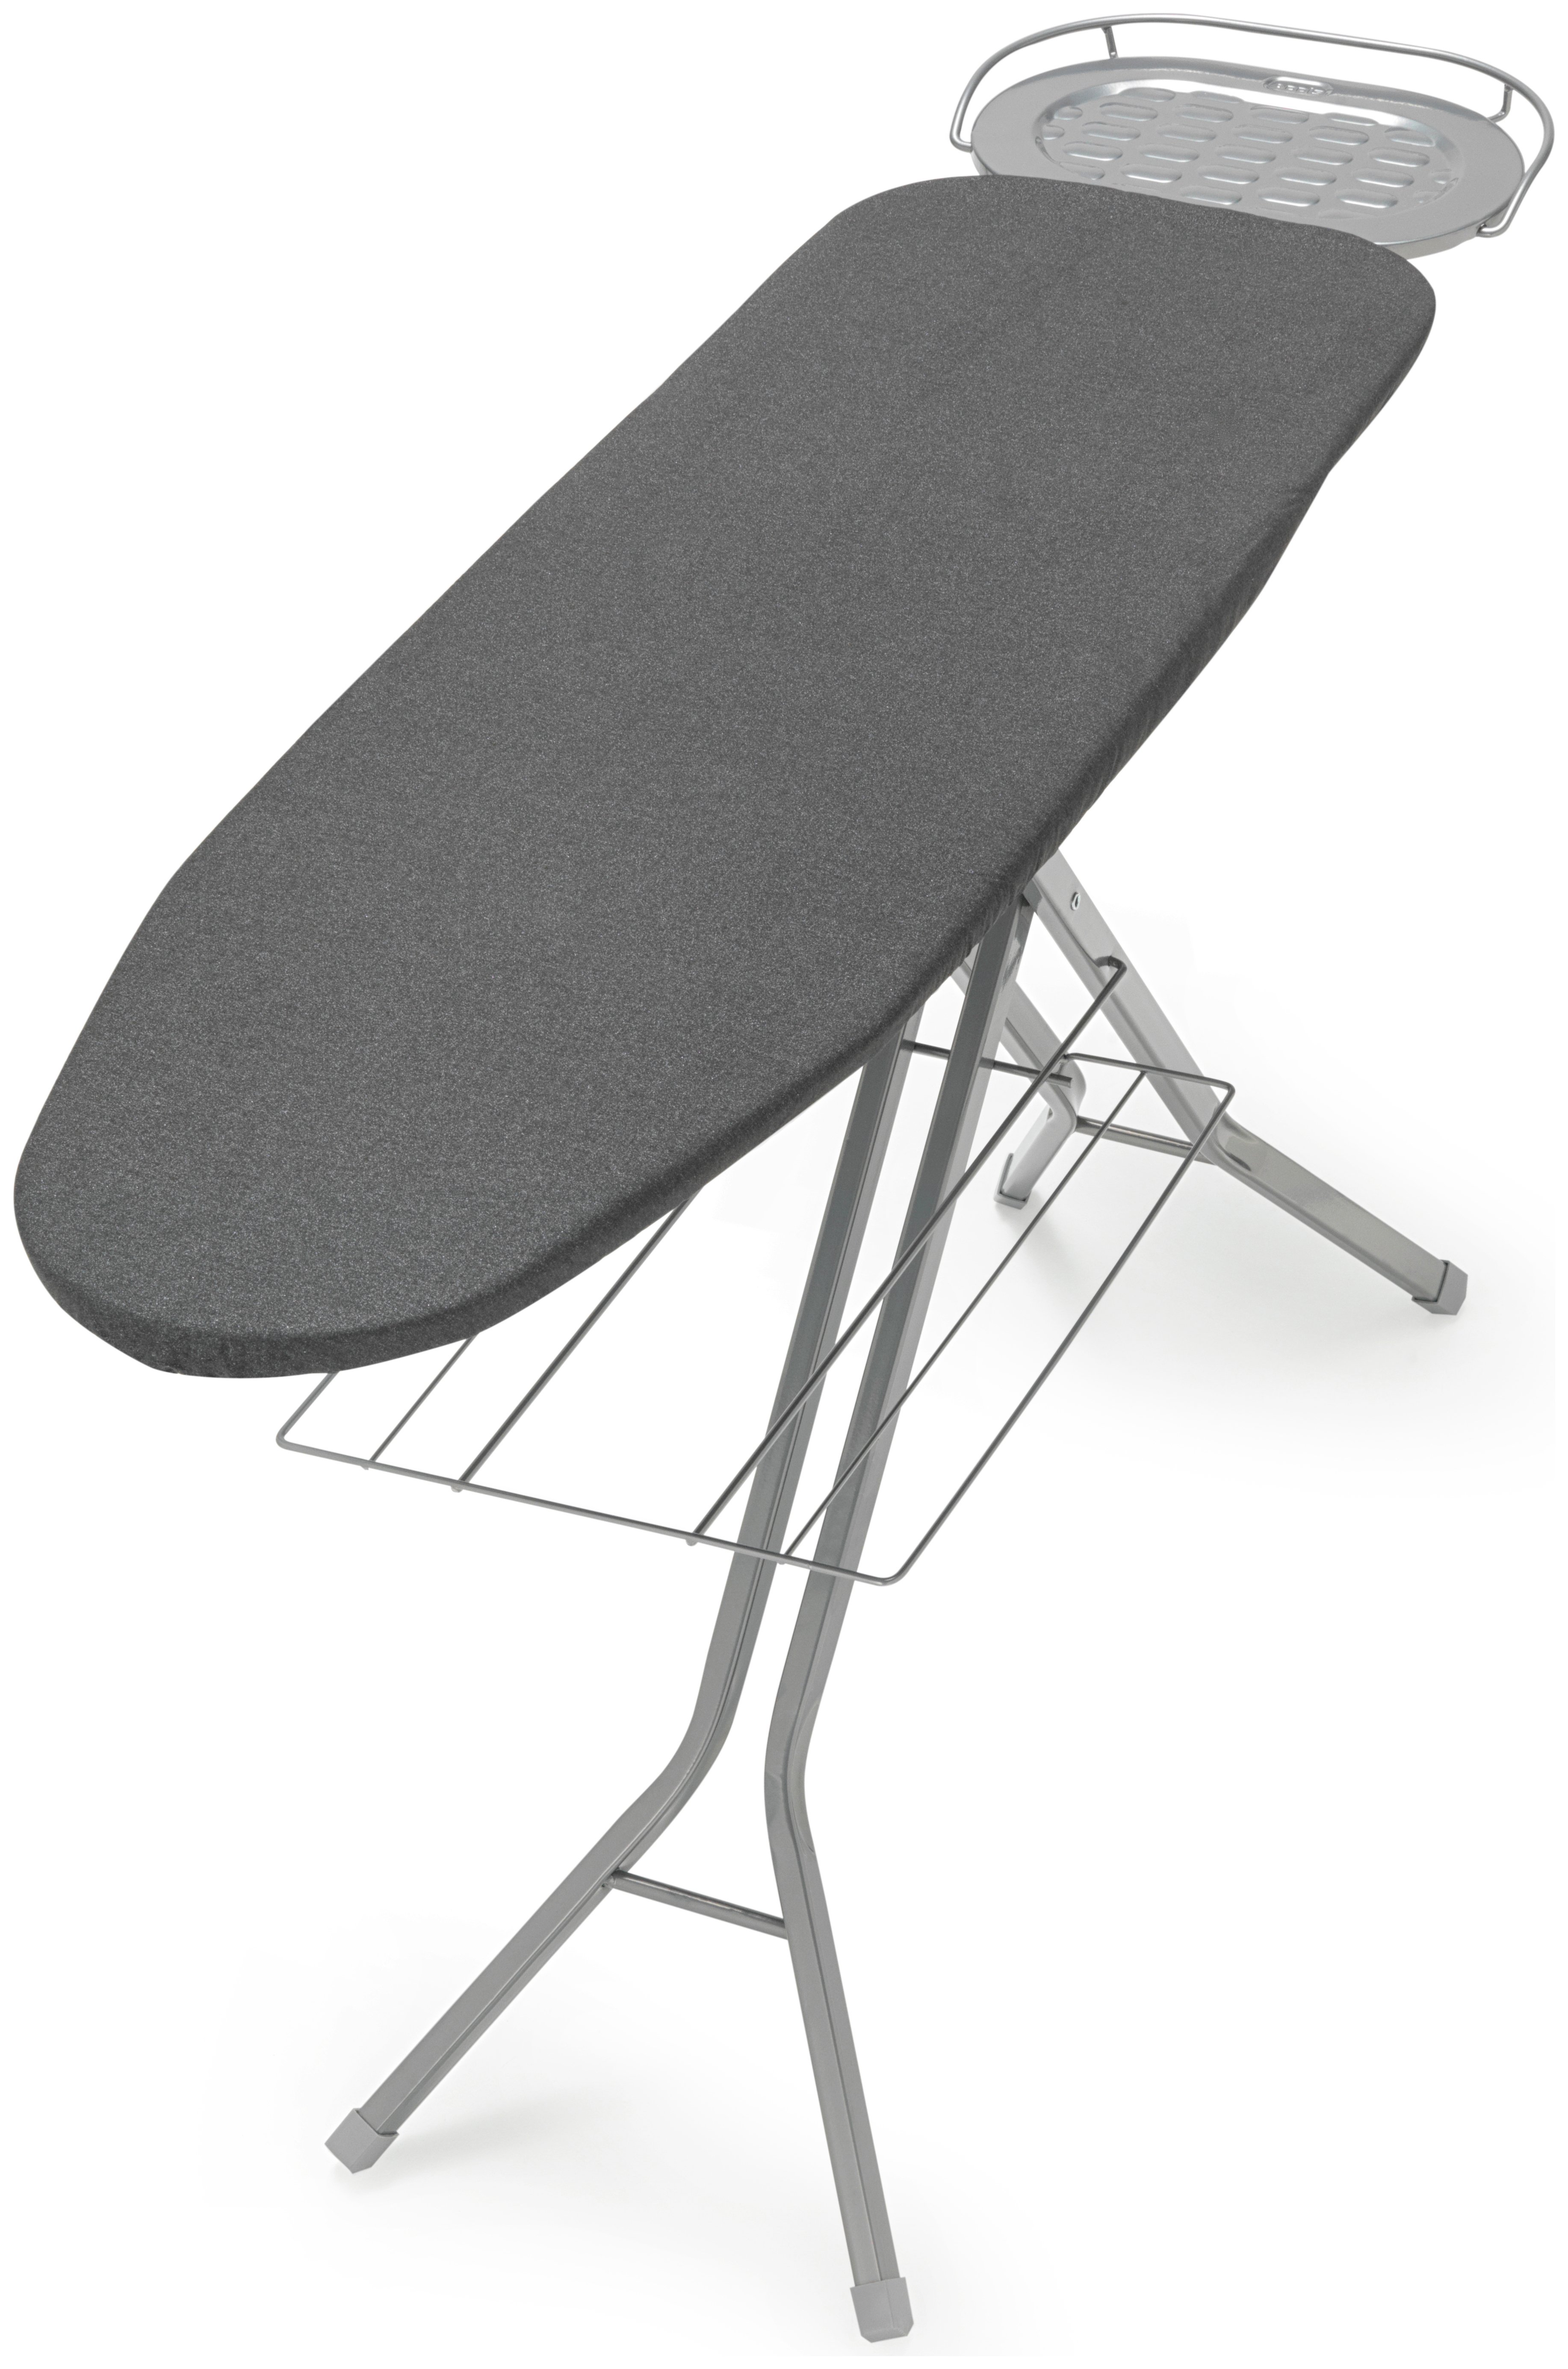 Addis Easy Fit Ironing Board Cover.